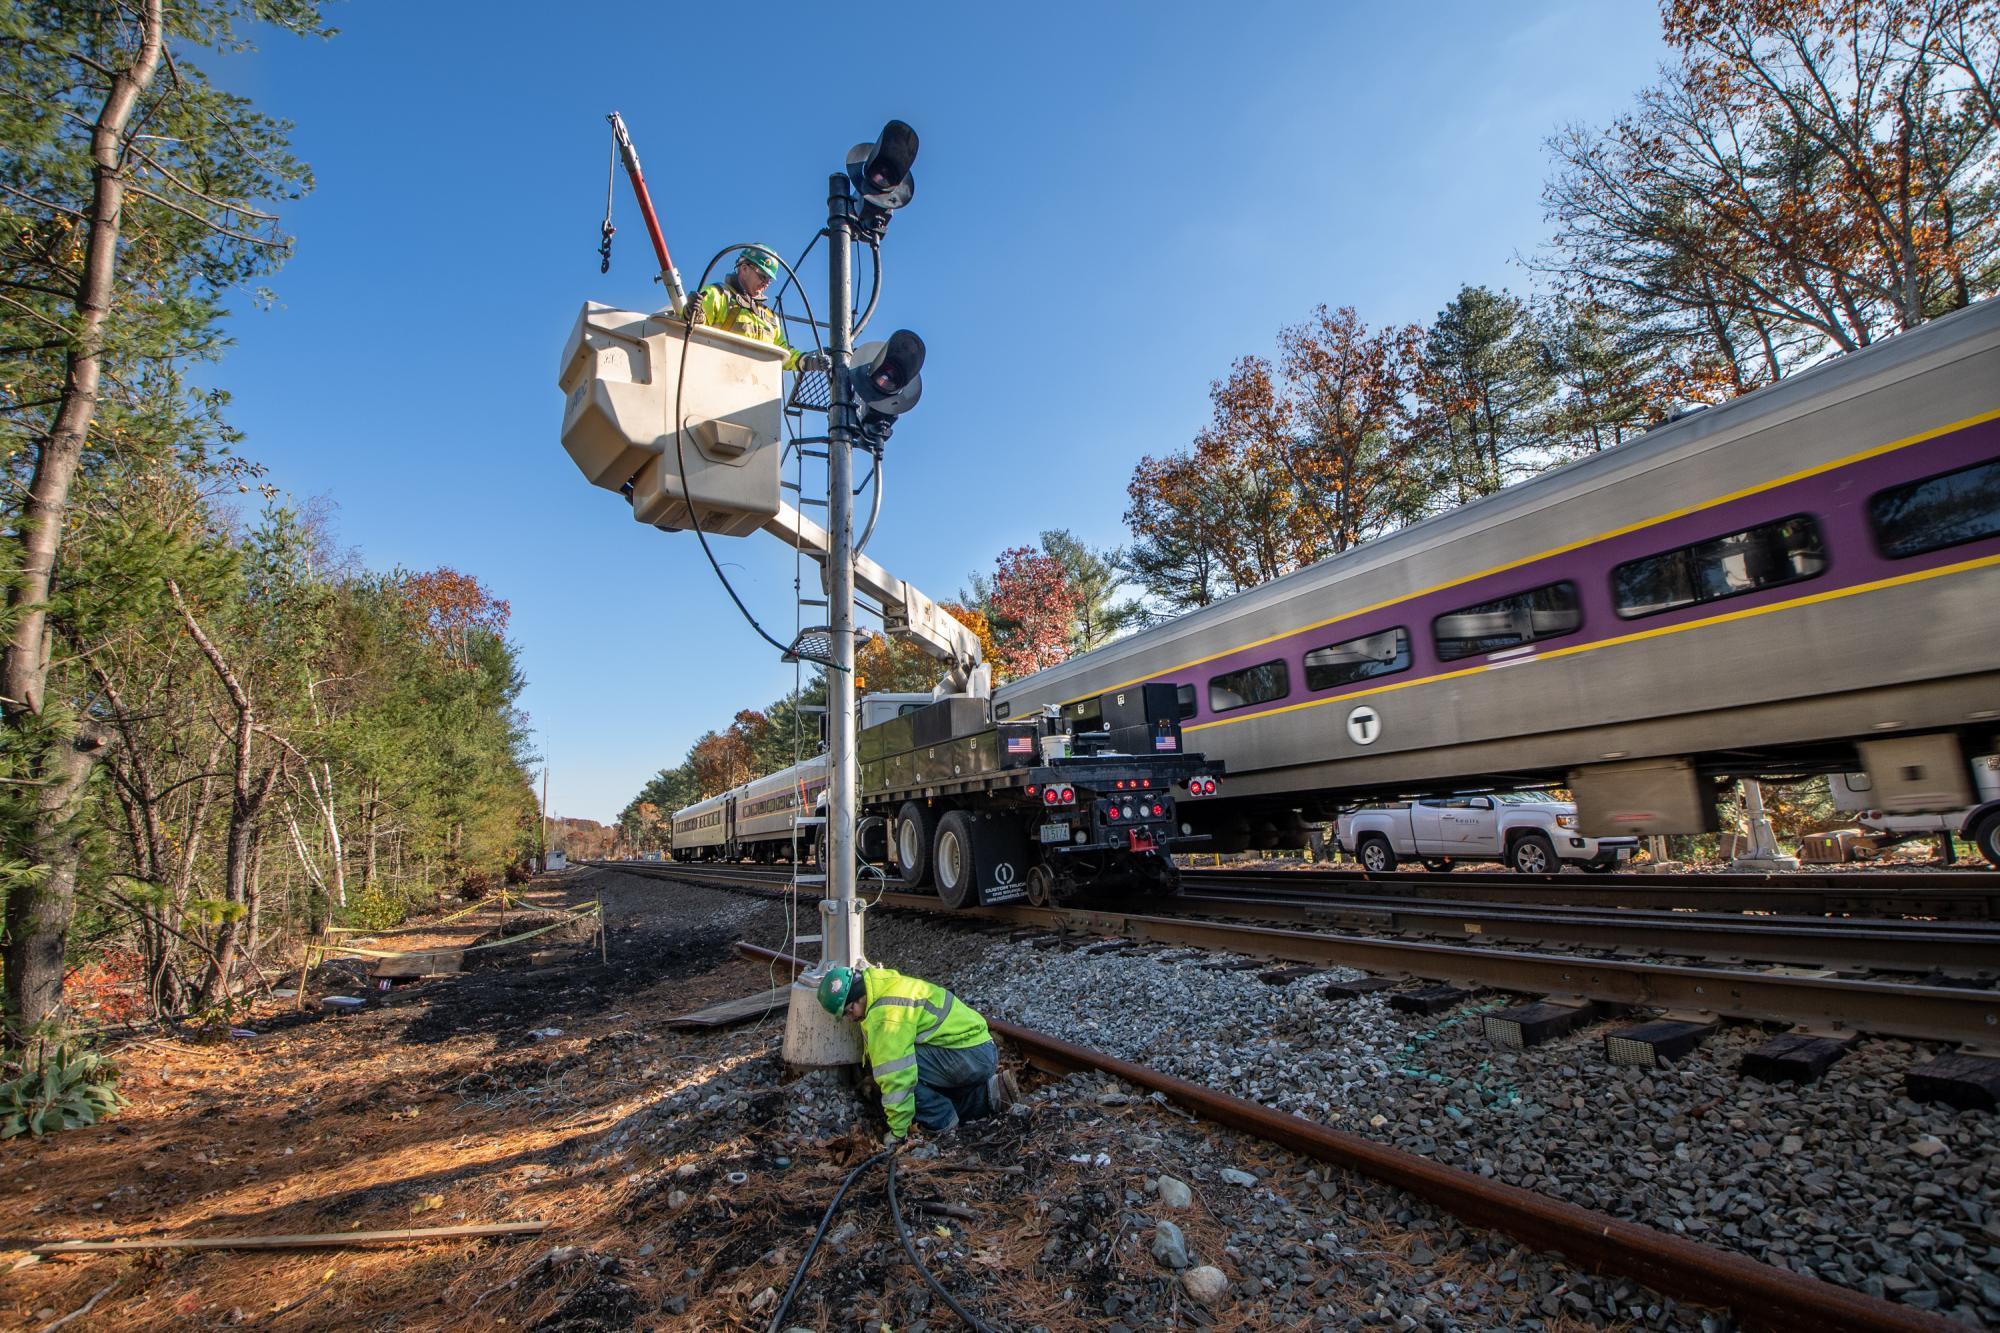 A crew works on signal upgrades in Weston as a Commuter Rail train passes by